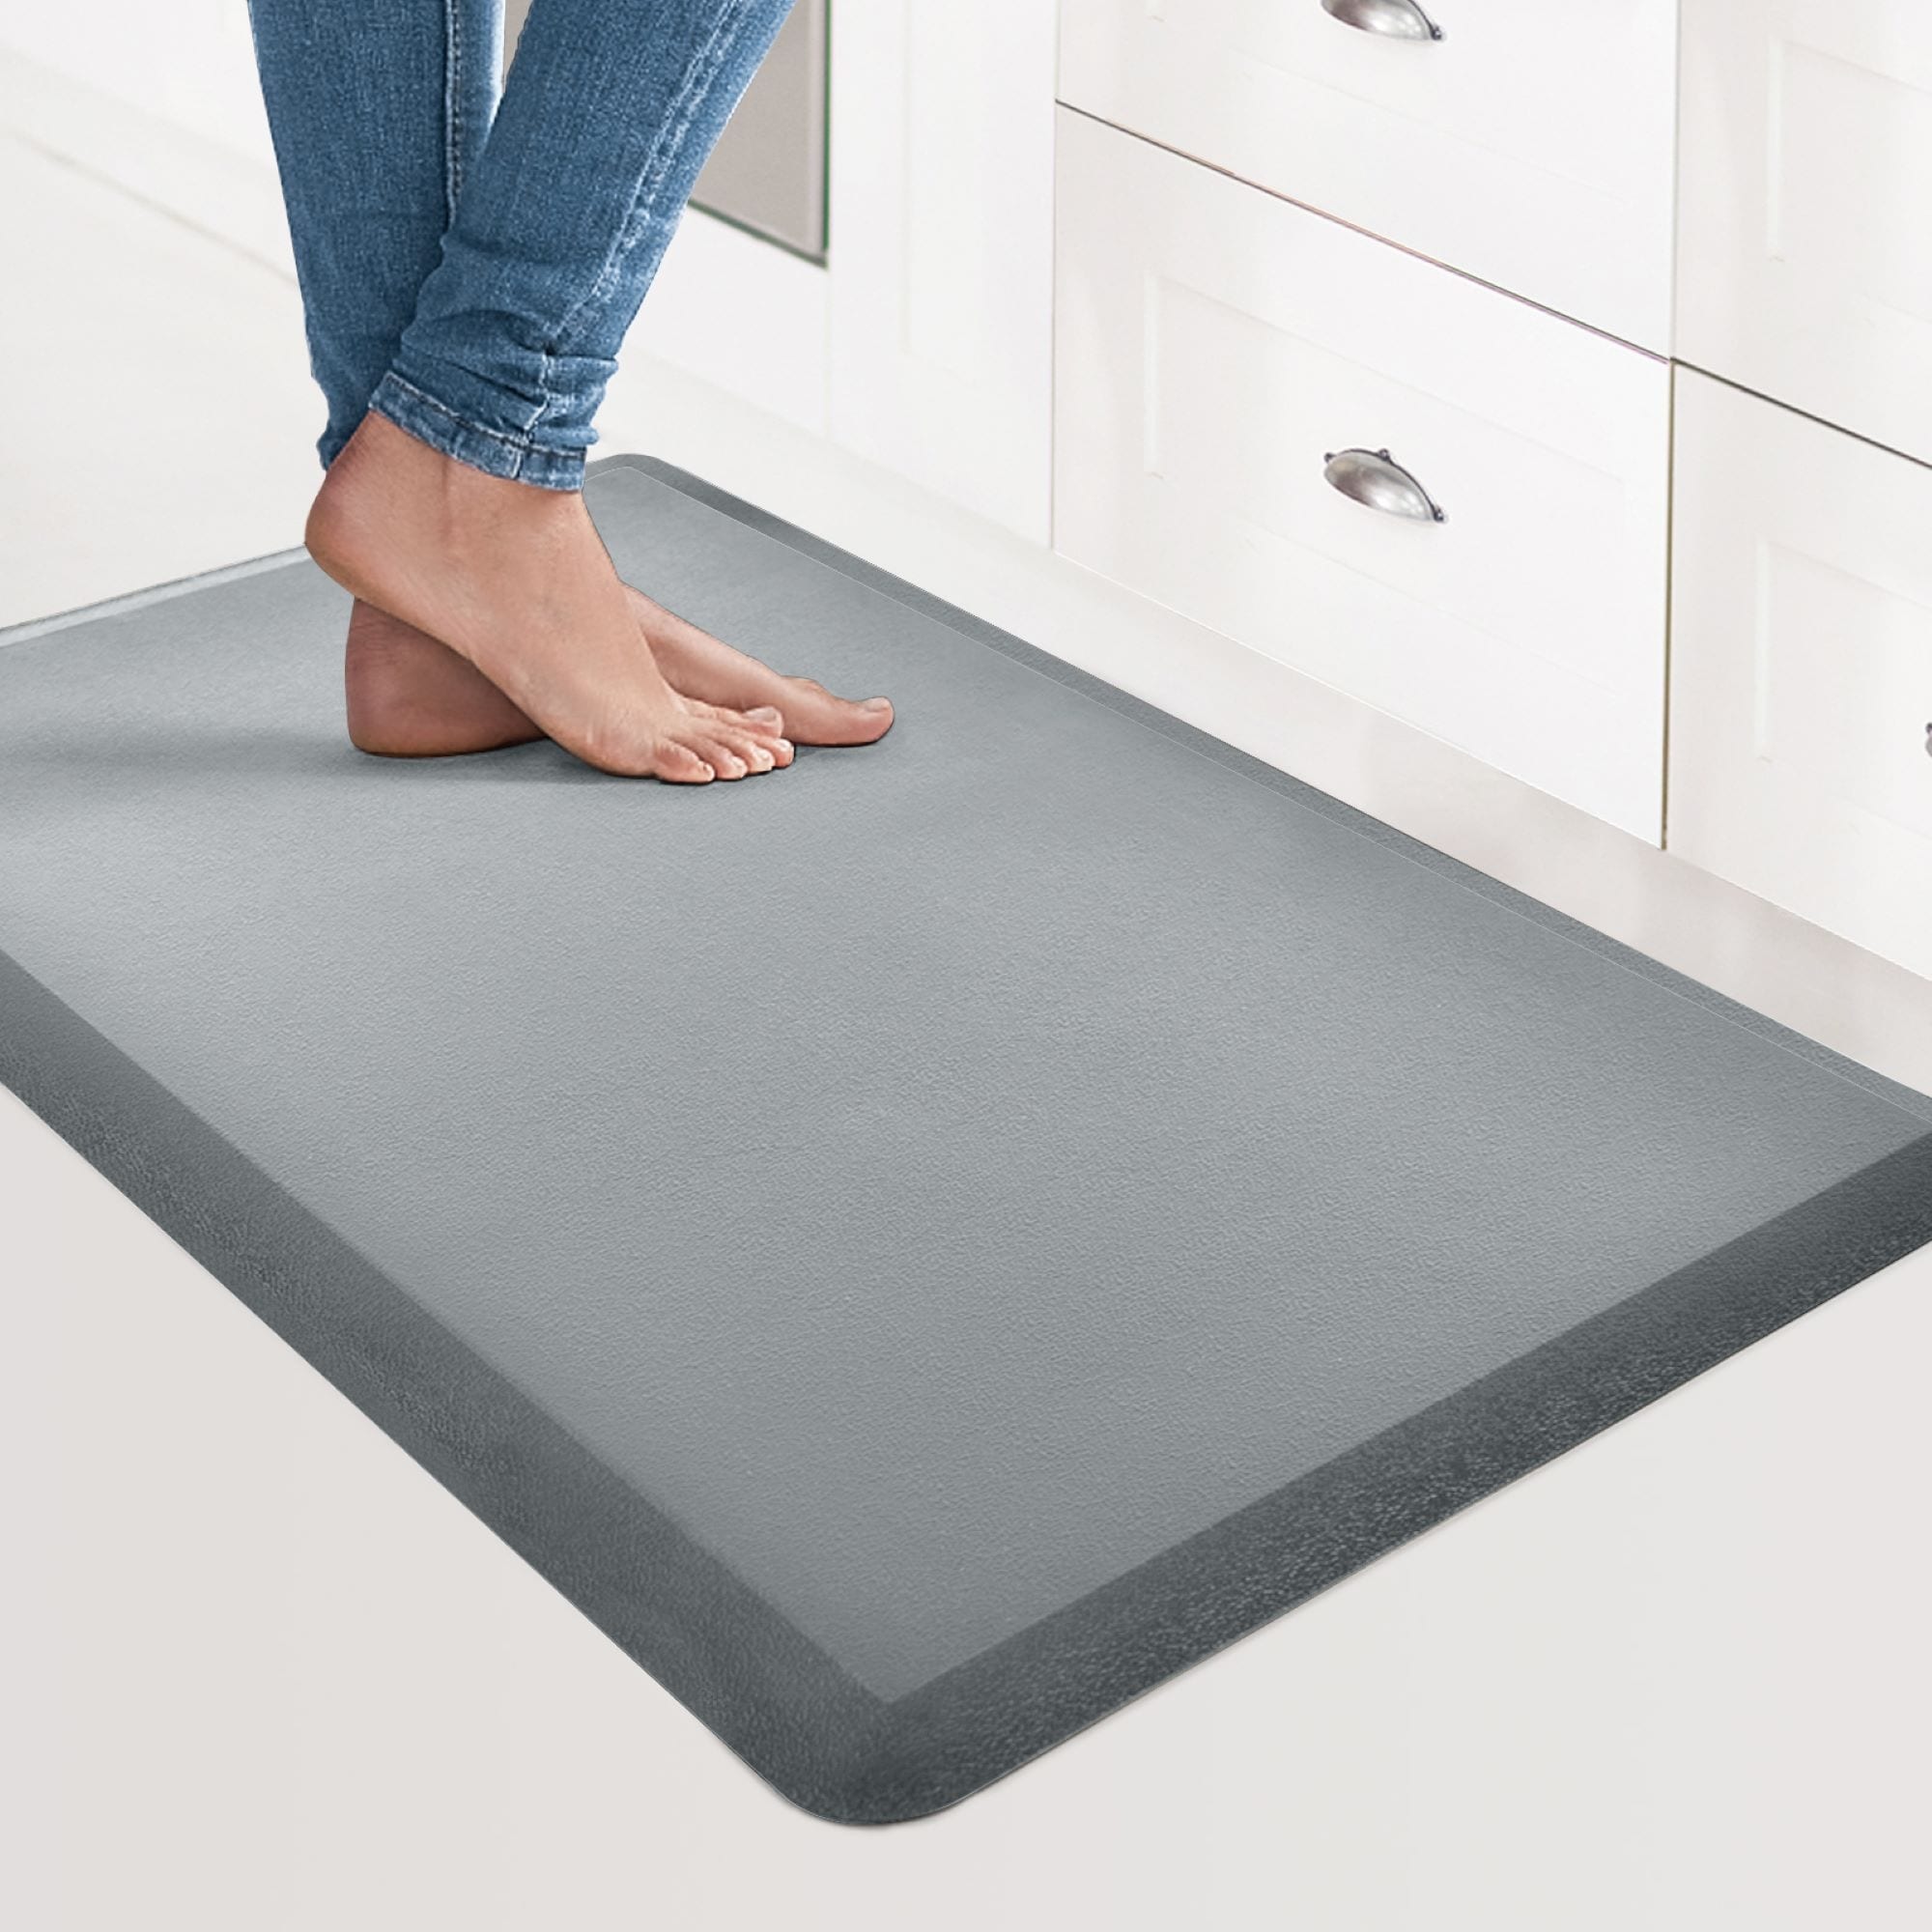 https://ak1.ostkcdn.com/images/products/is/images/direct/7afb192e2198d4e7d005d21ced4a8fdb77bc1742/Premium-Anti-Fatigue-Comfort-Mat%2C-Thick%2C-Non-Slip-%26-All-Purpose-Comfort---for-Kitchen%2C-Office-Standing-Desk.jpg